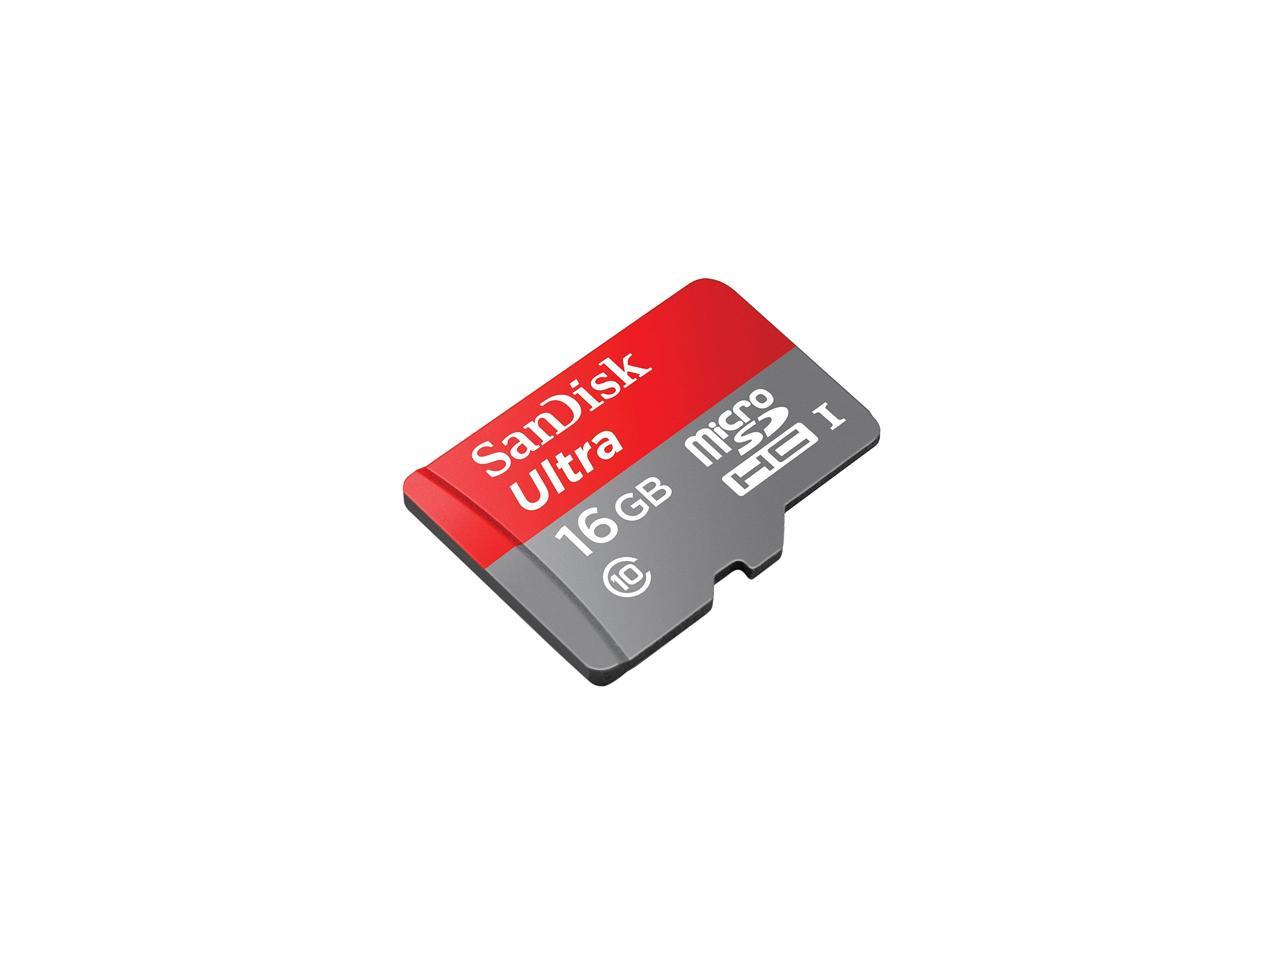 Painstaking Retaliation Realm SanDisk 16GB Ultra microSDHC UHS-I/Class 10 Memory Card with Adapter, Speed  Up to 80MB/s (SDSQUNC-016G-GN6MA) - Newegg.com